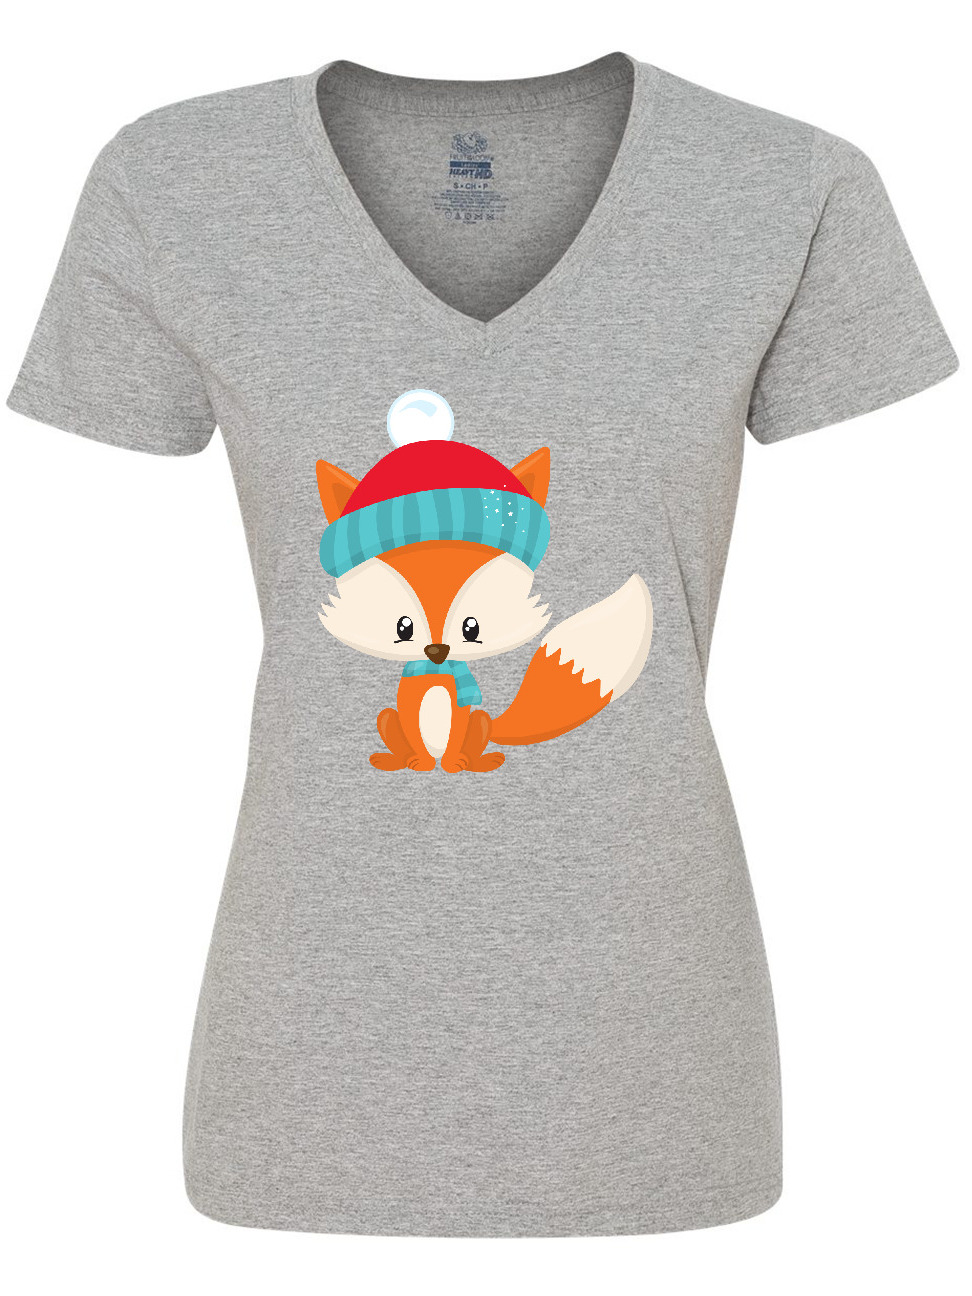 Inktastic Cute Fox, Fox With Hat And Scarf, Orange Fox Women's V-Neck T-Shirt - image 1 of 4